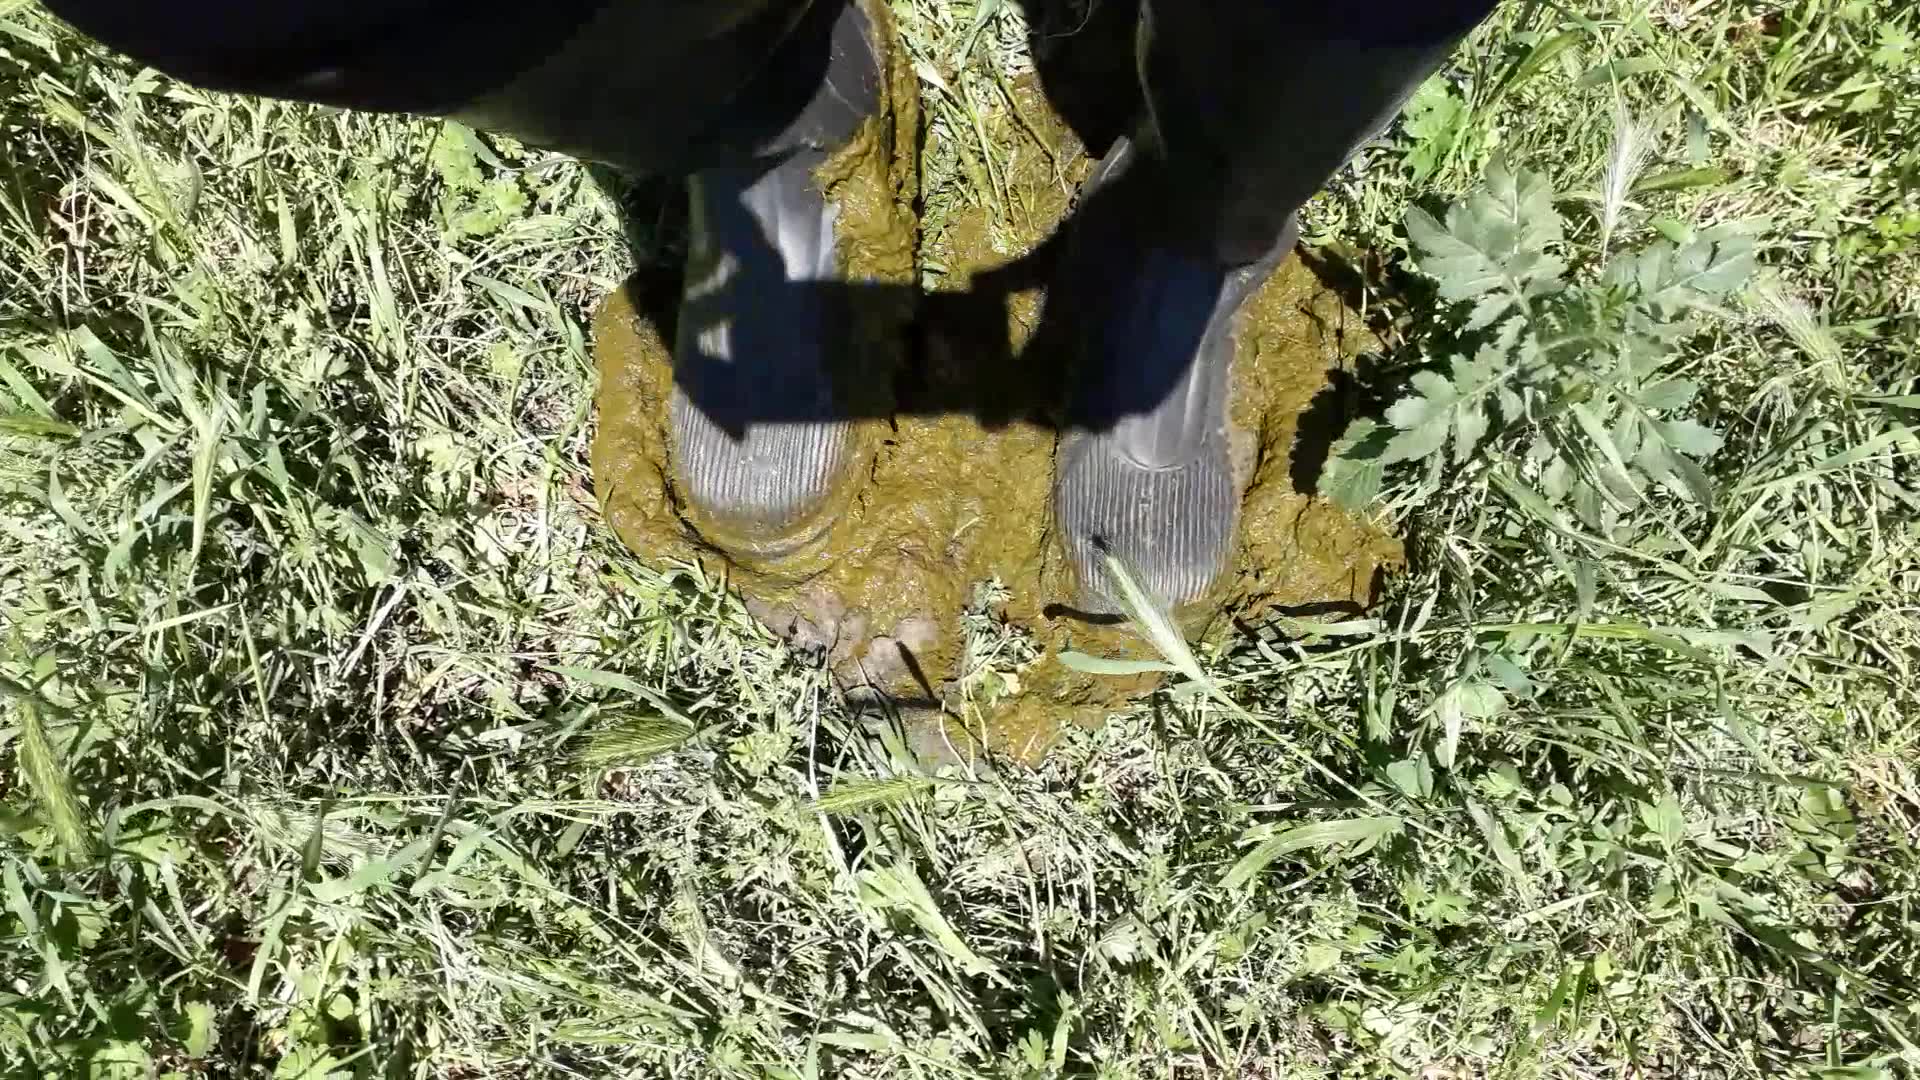 Rubber boots vs cowshit - video 27